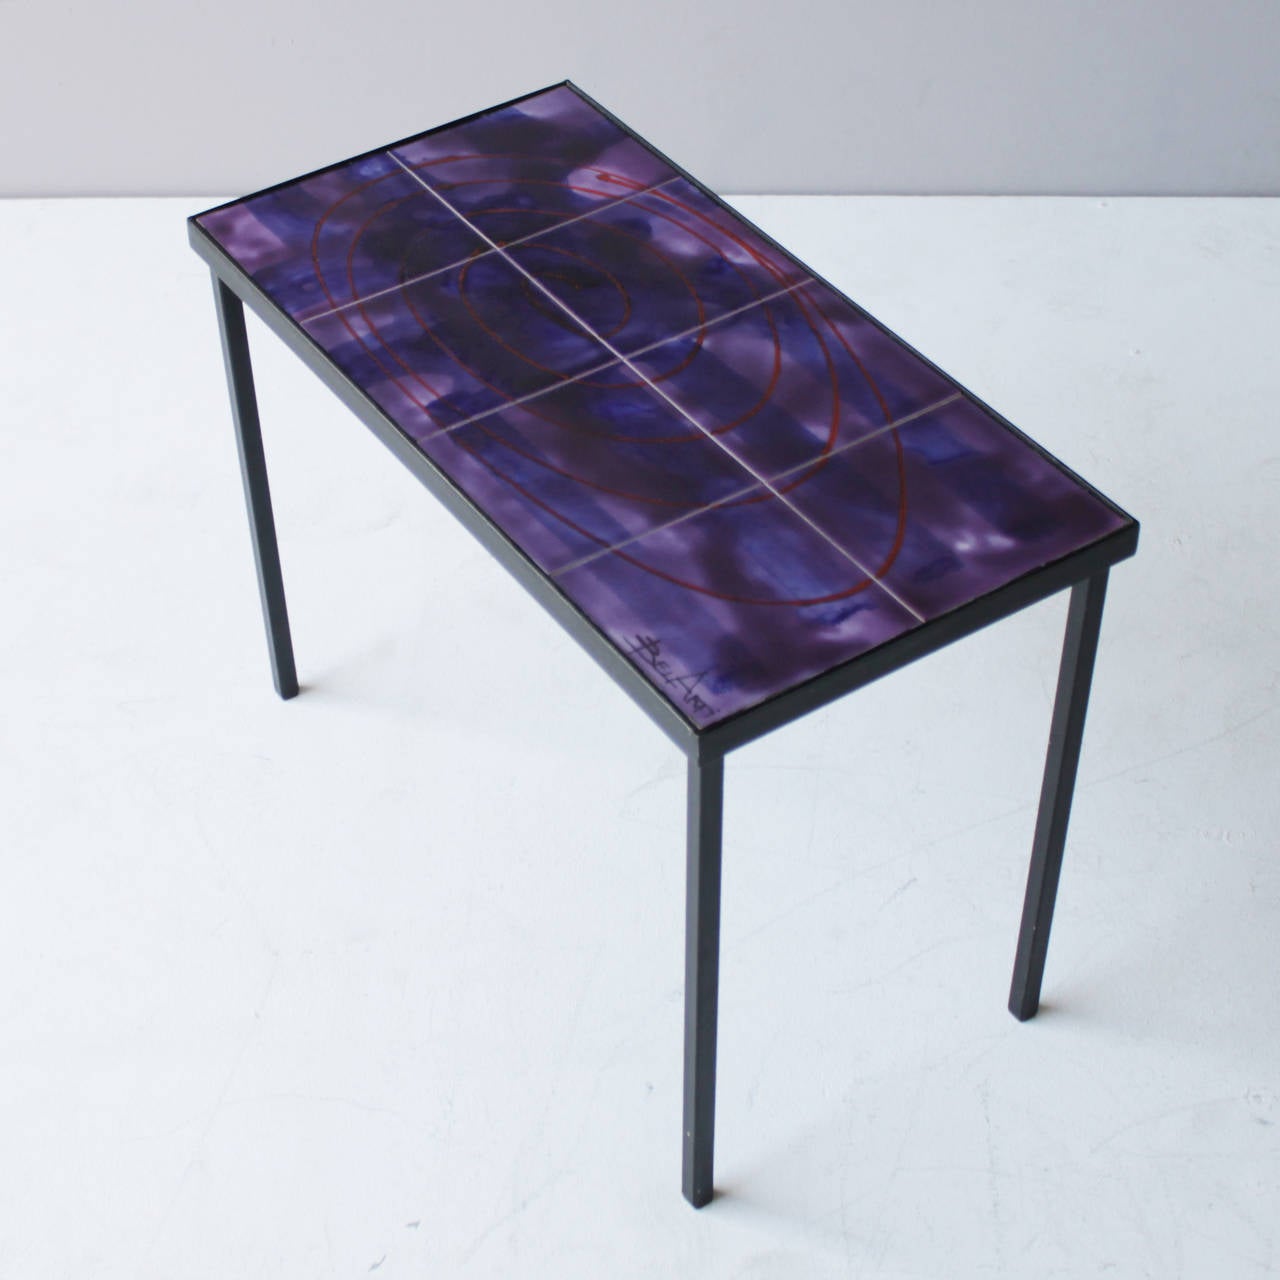 Coffee table or side table with purple glazed tiles from Belgium. Signed Bélarti.
Dimensions: Height: 17.3 in. (44 cm), width: 24.0 in. (61 cm), depth: 12.2 inches (31 cm).